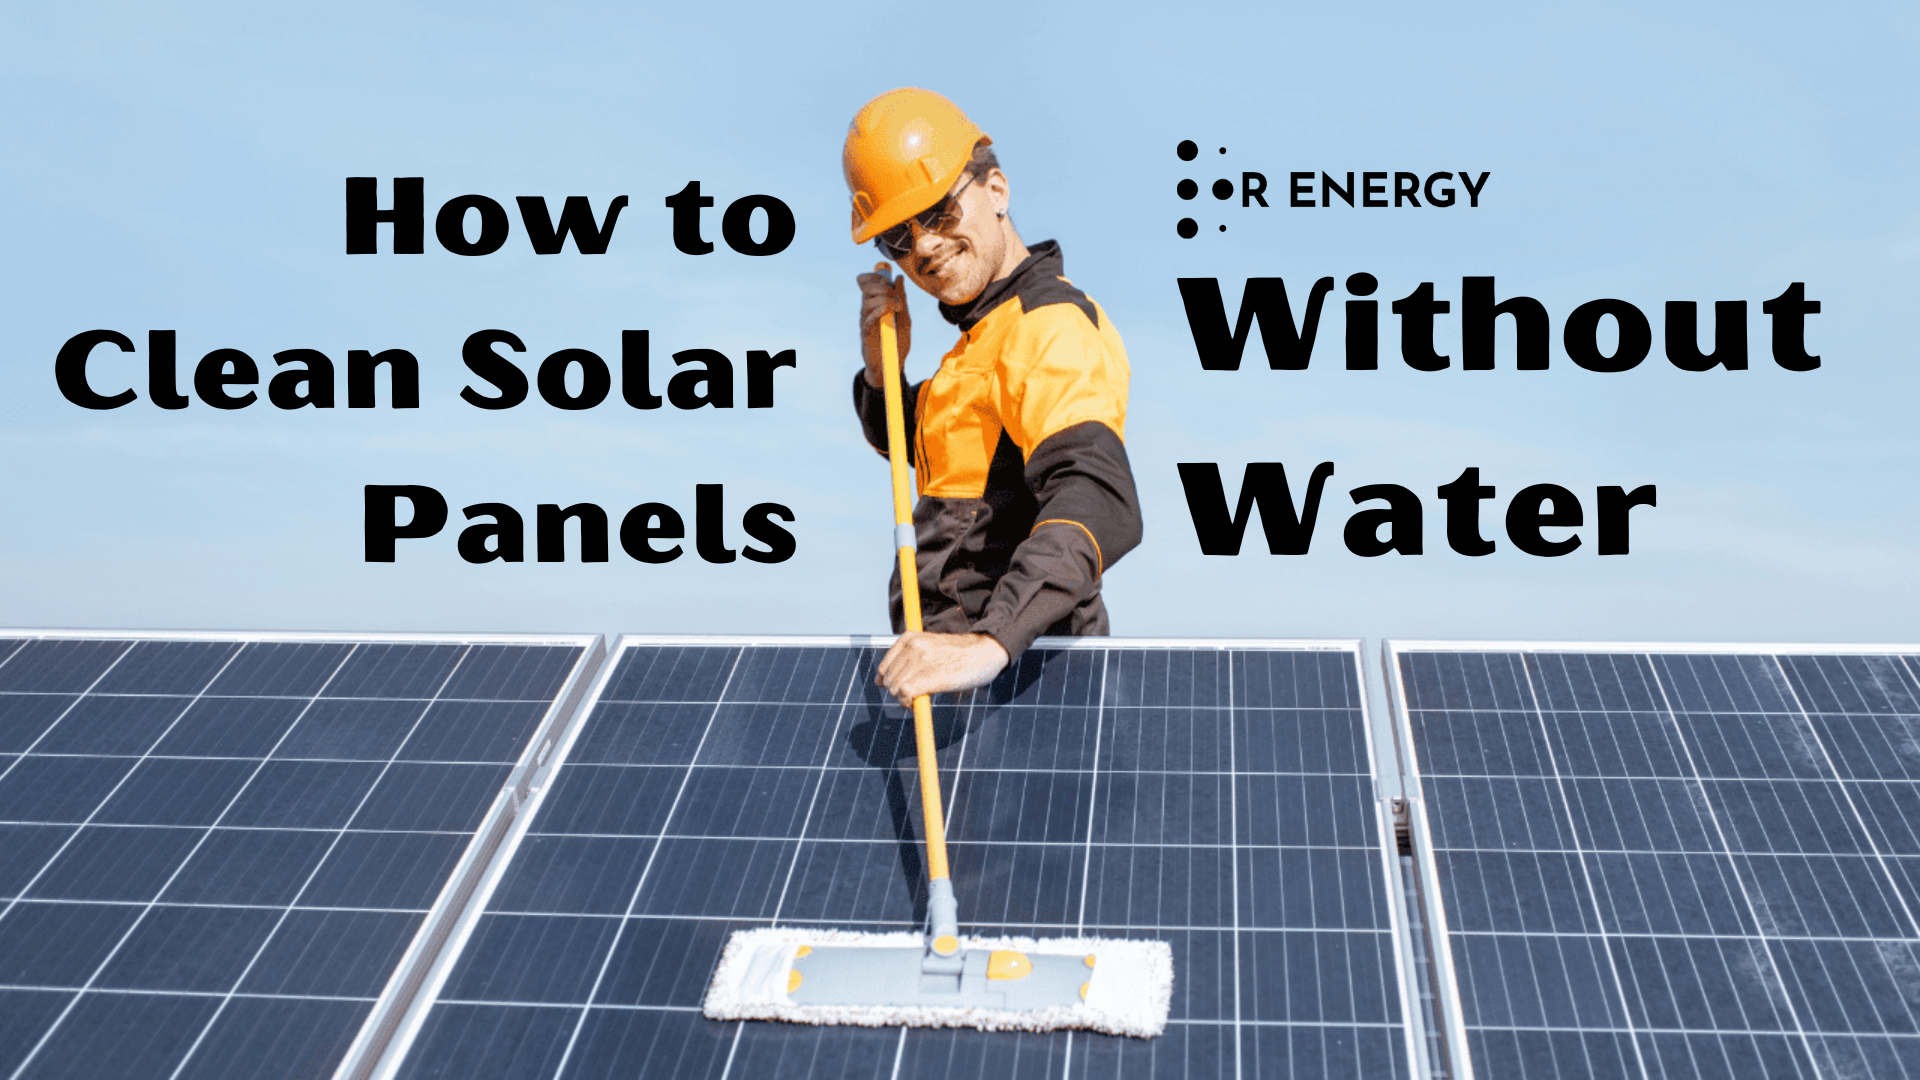 https://renergyinfo.com/how-to-clean-your-solar-panels-without-water/